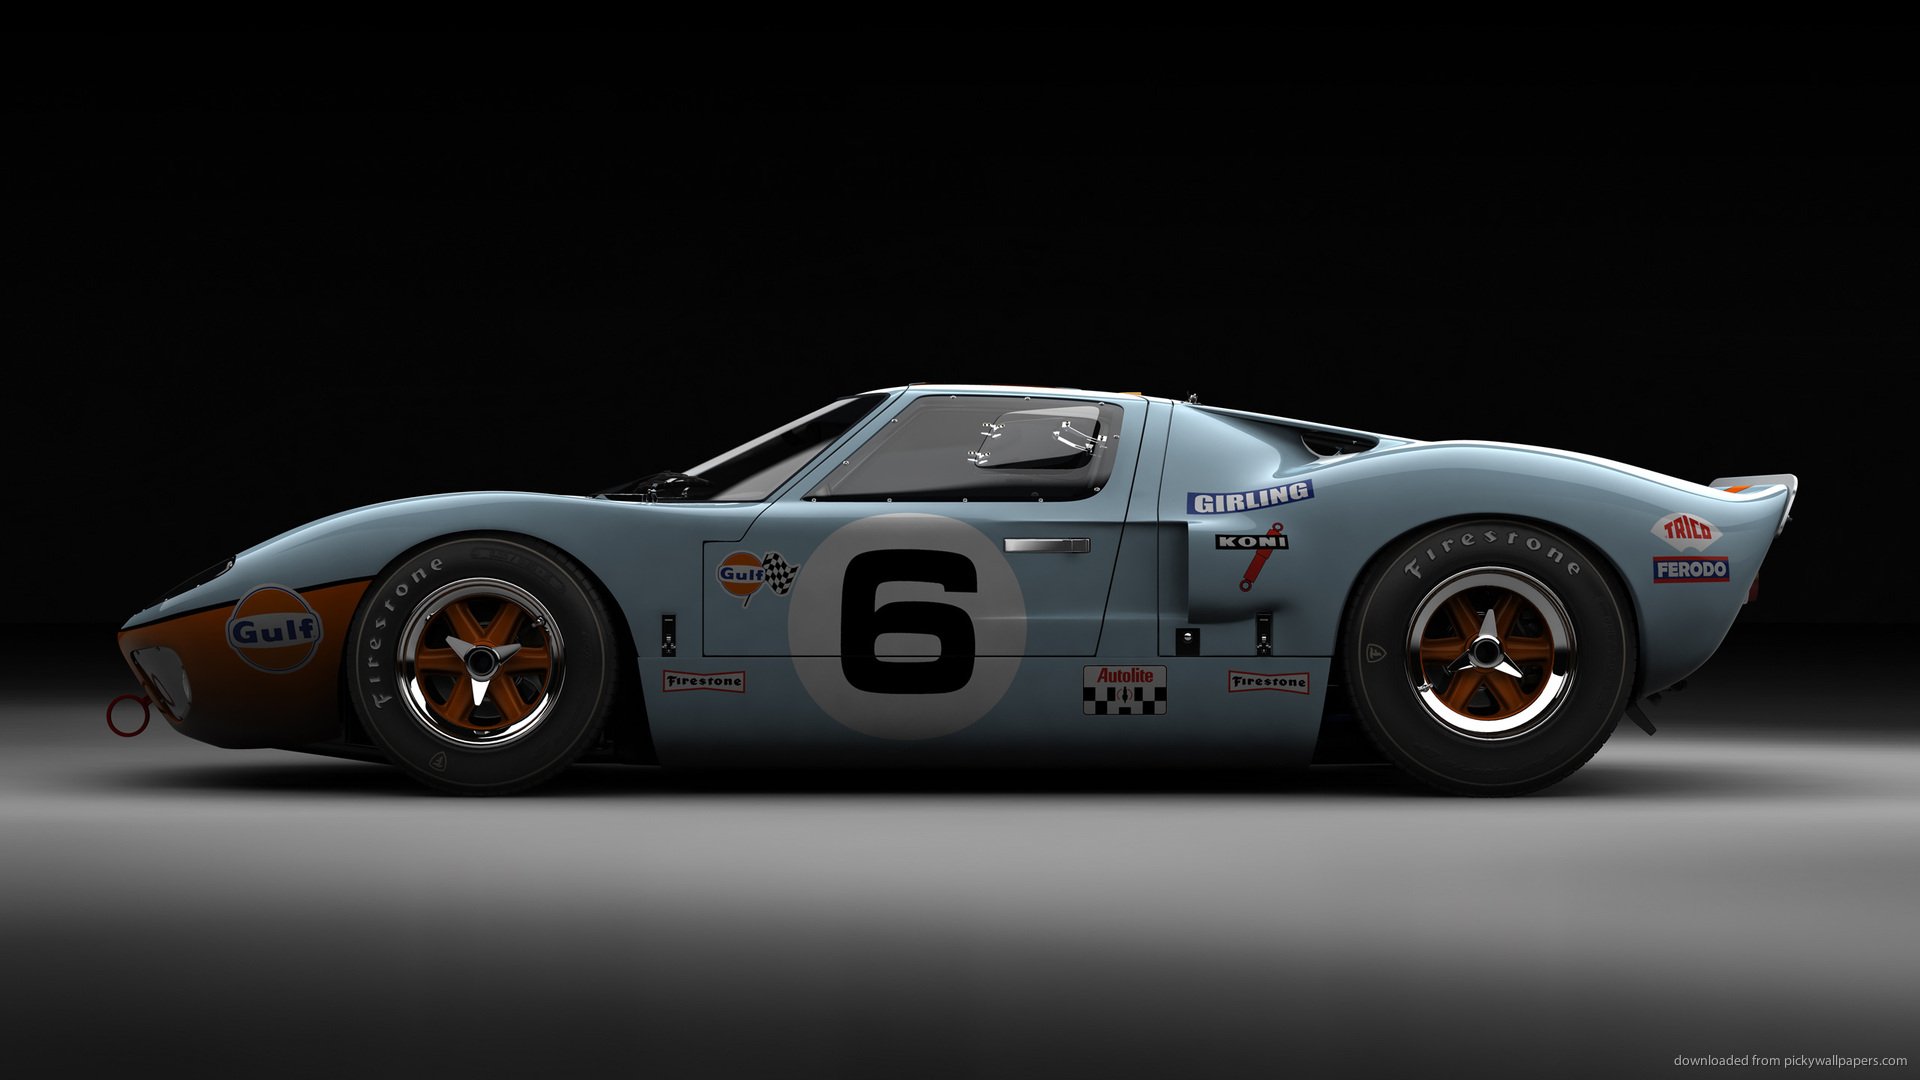 Ford Gt40 Wallpaper 4303 Hd Wallpapers in Cars   Imagescicom